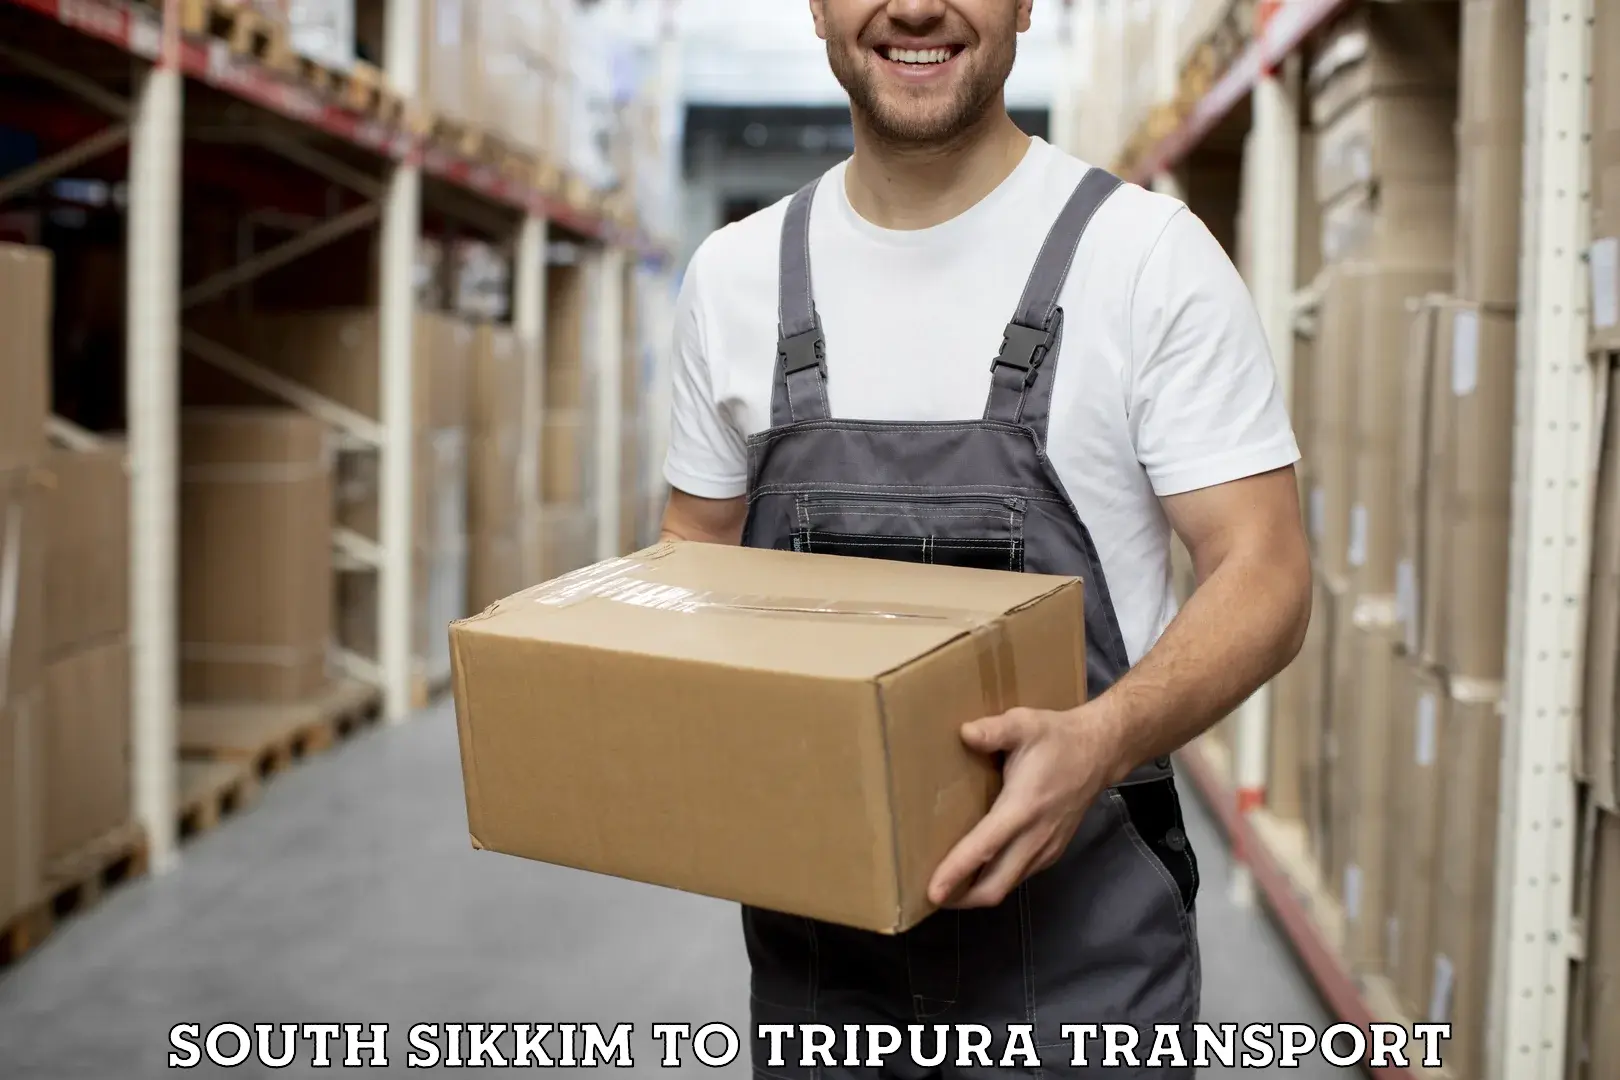 Two wheeler transport services in South Sikkim to Tripura